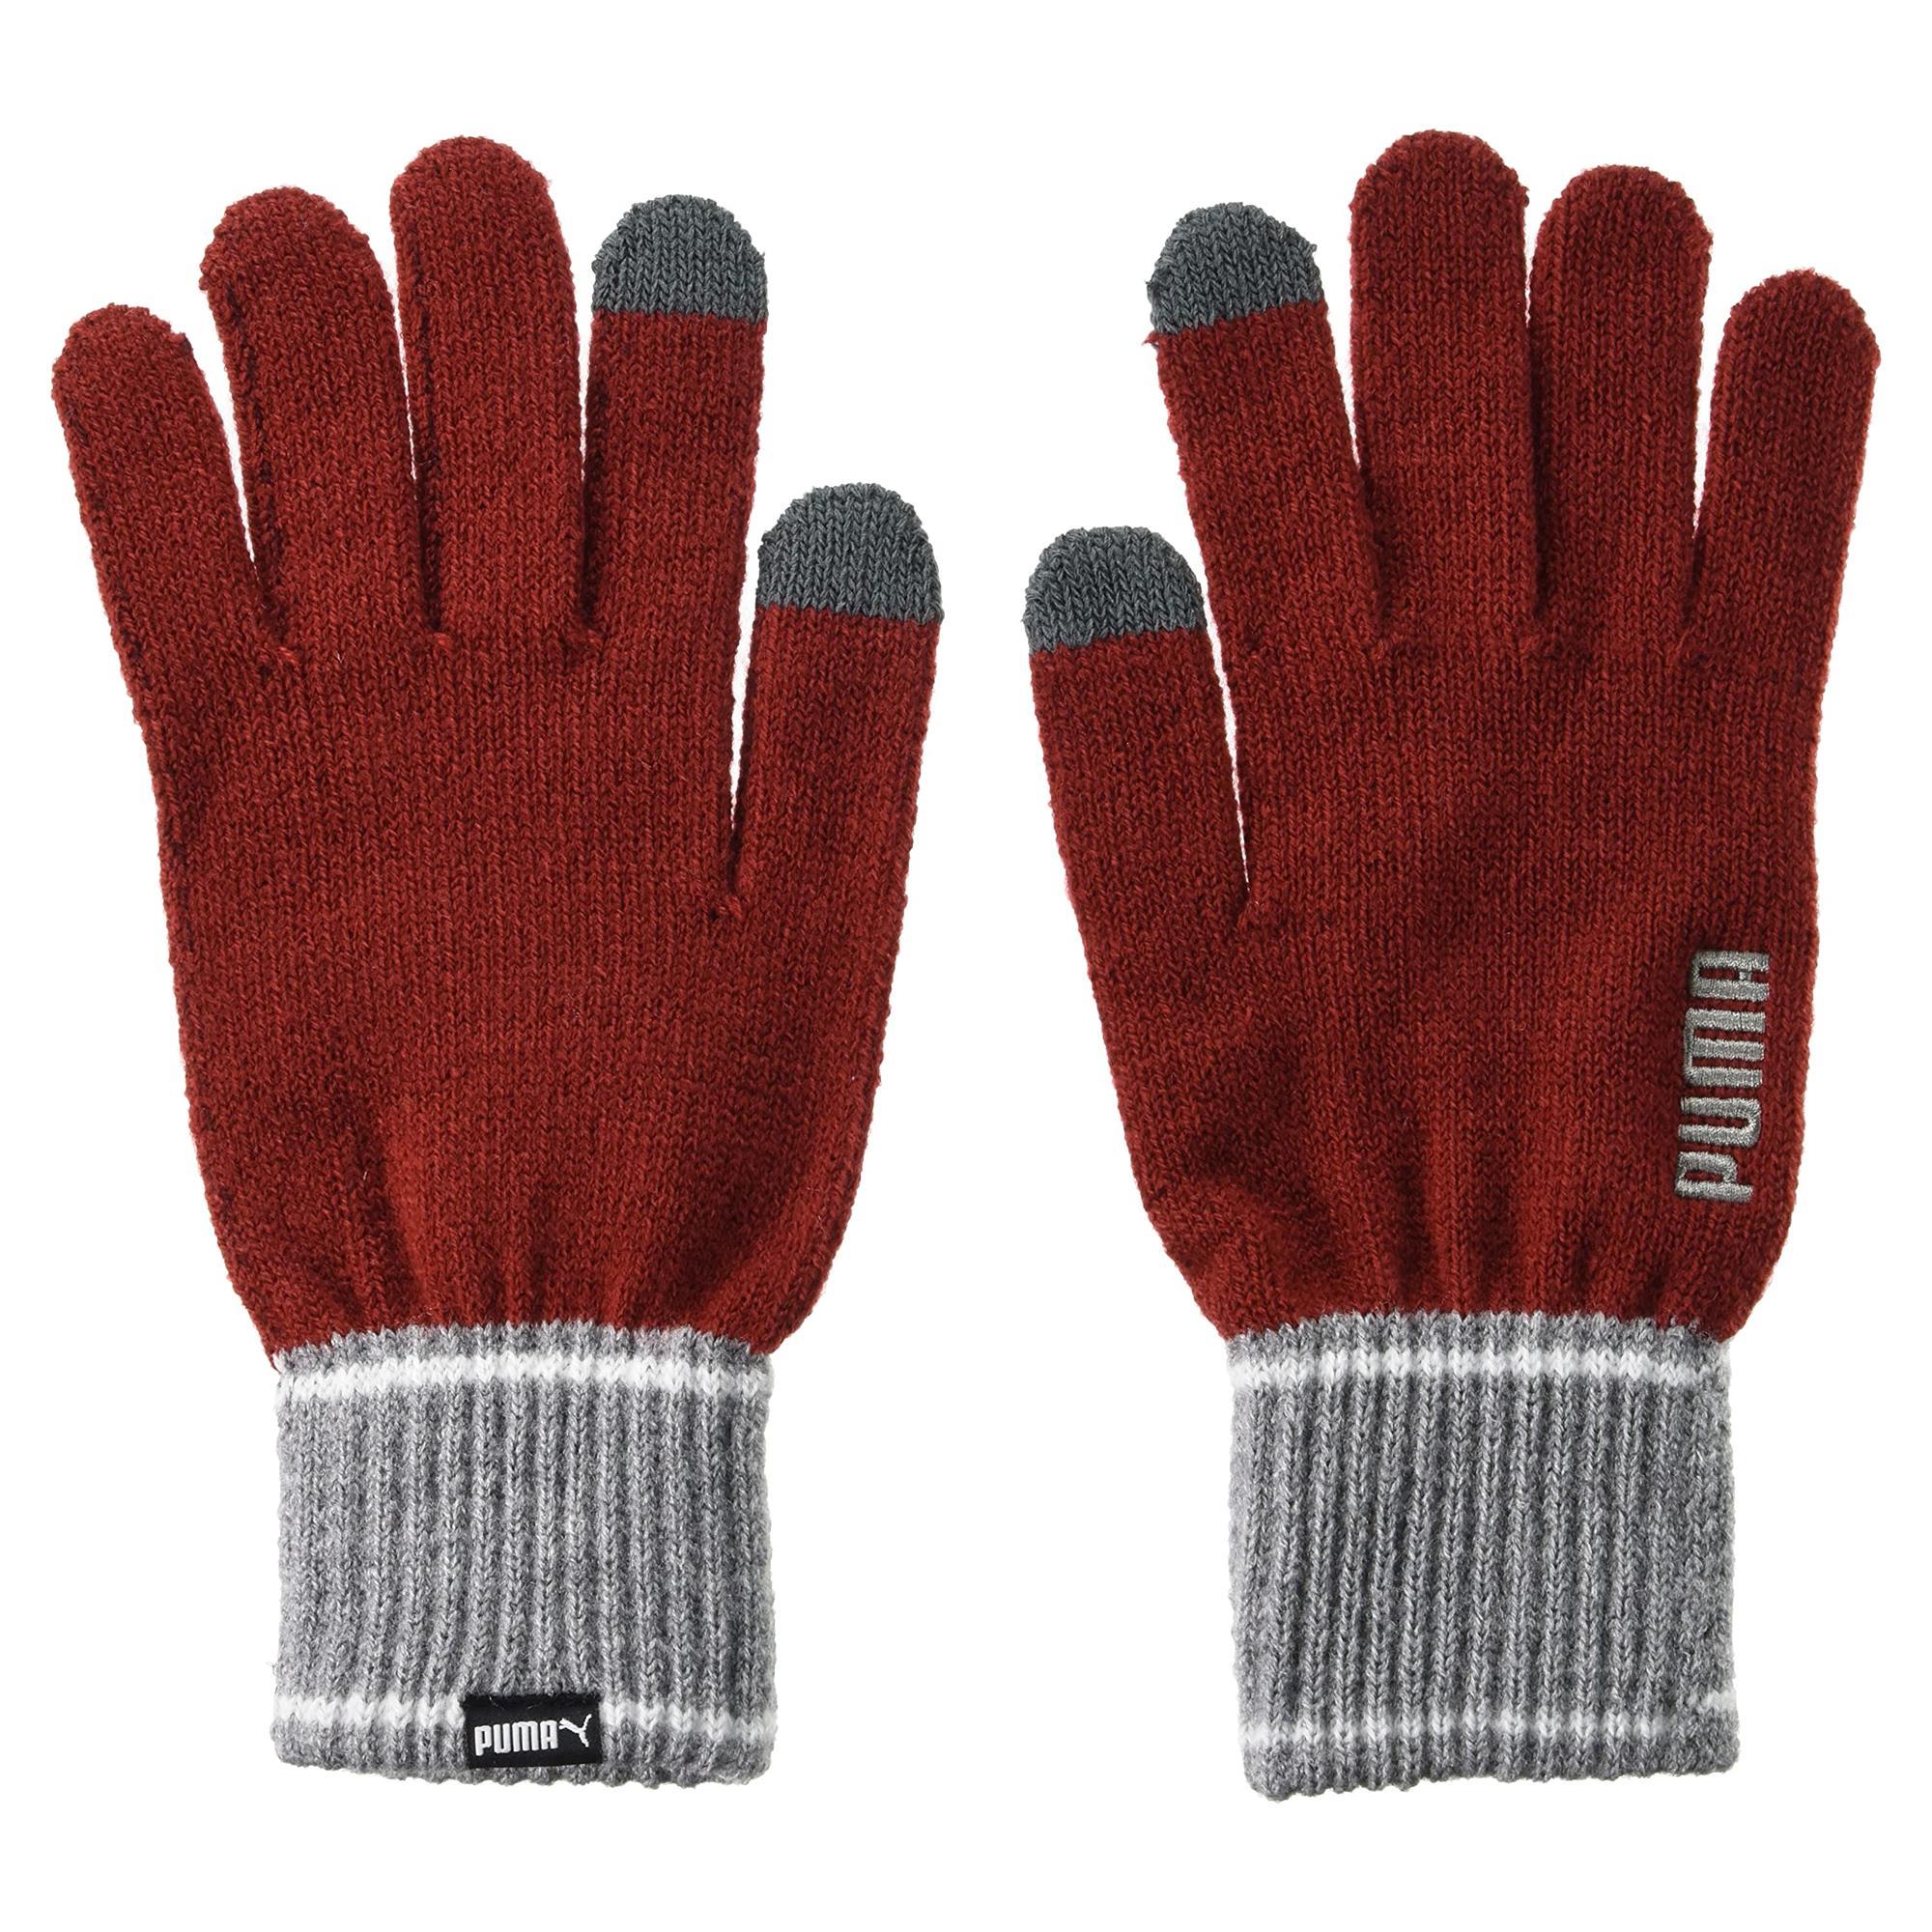 Puma Unisex Adult Knitted Winter Gloves (Red/Grey Heather) (L-XL)